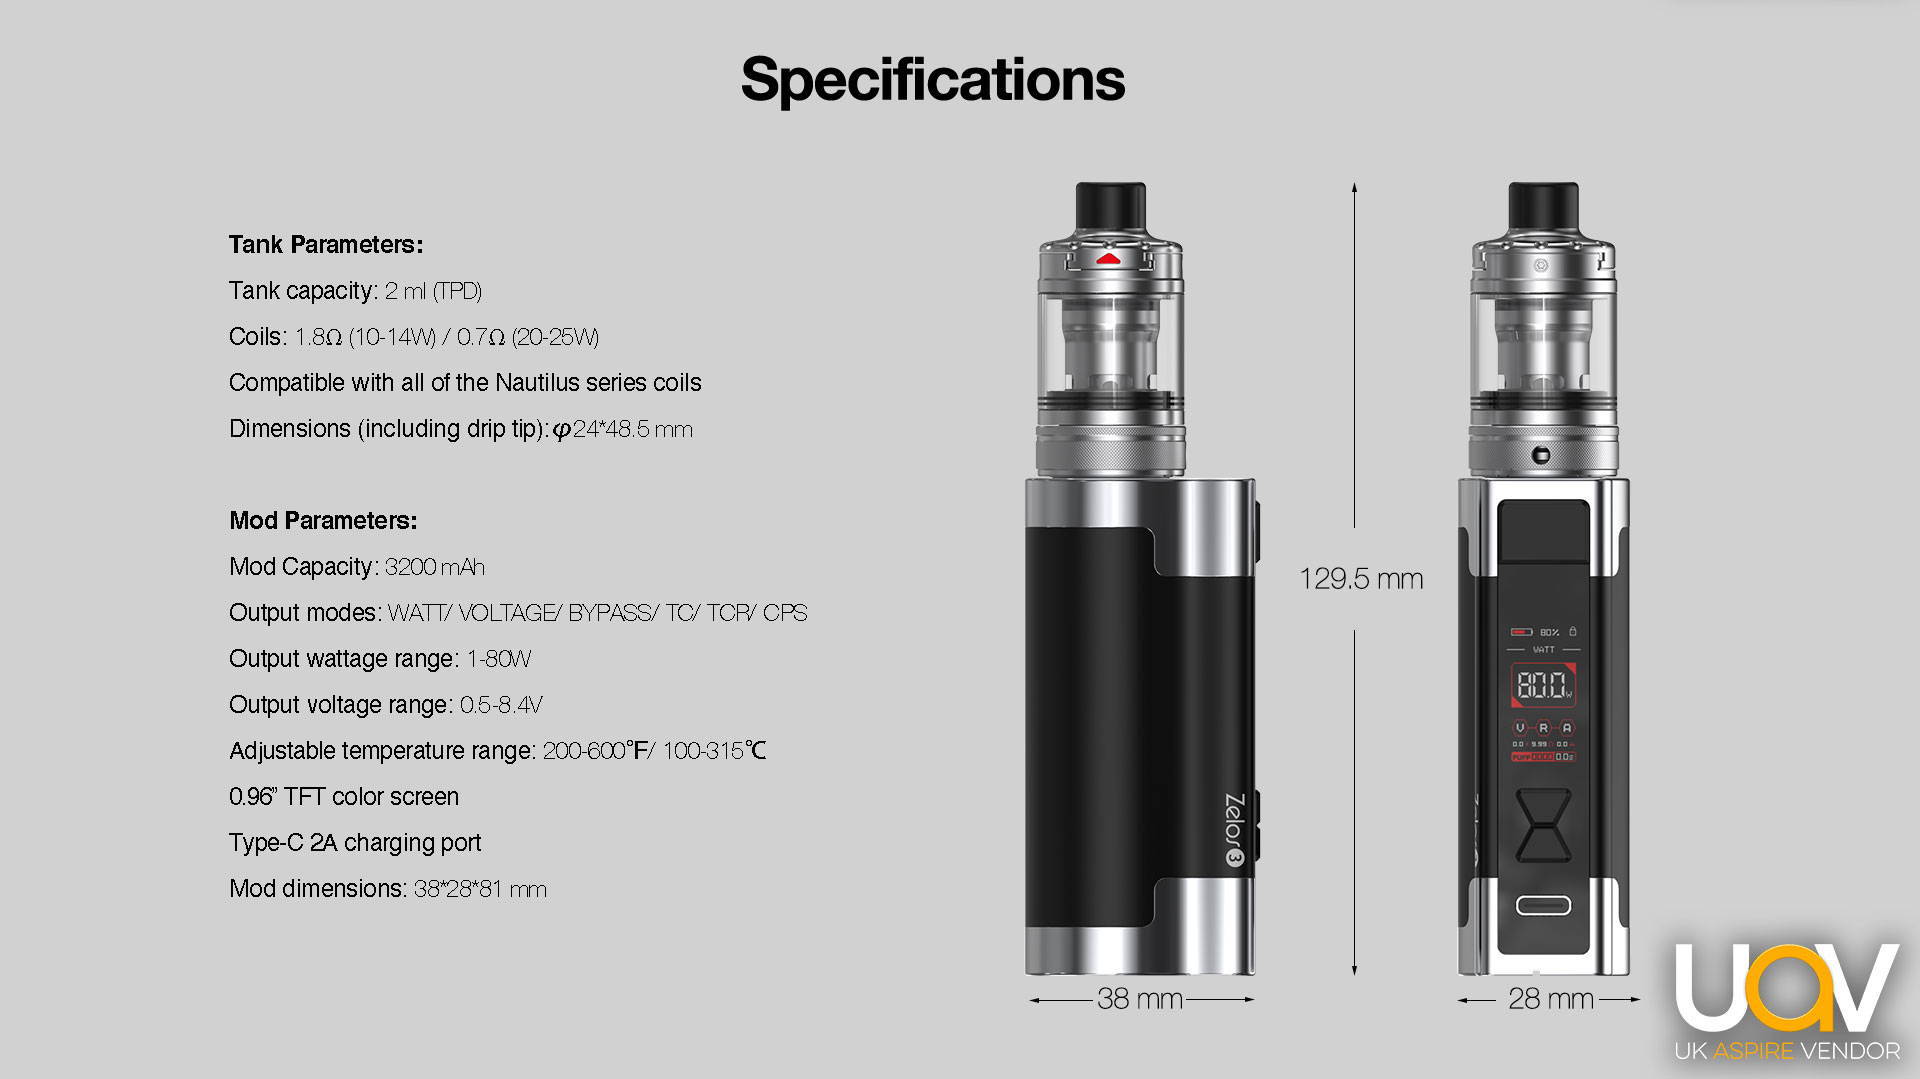 Tank Parameters:  Tank capacity: 4 ml / 2 ml (TPD) Coils: 1.8Ω (10-14W) / 0.7Ω (20-25W)  Compatible with all of the Nautilus series coils Dimensions (including drip tip):φ24*48.5 mm  Mod Parameters:  Mod Capacity: 3200 mAh  Output modes: WATT/ VOLTAGE/ BYPASS/ TC/ TCR/ CPS  Output wattage range: 1-80W  Output voltage range: 0.5-8.4V  Adjustable temperature range: 200-600℉/ 100-315℃  0.96” TFT color screen  Type-C 2A charging port  Mod dimensions: 38*28*81 mm